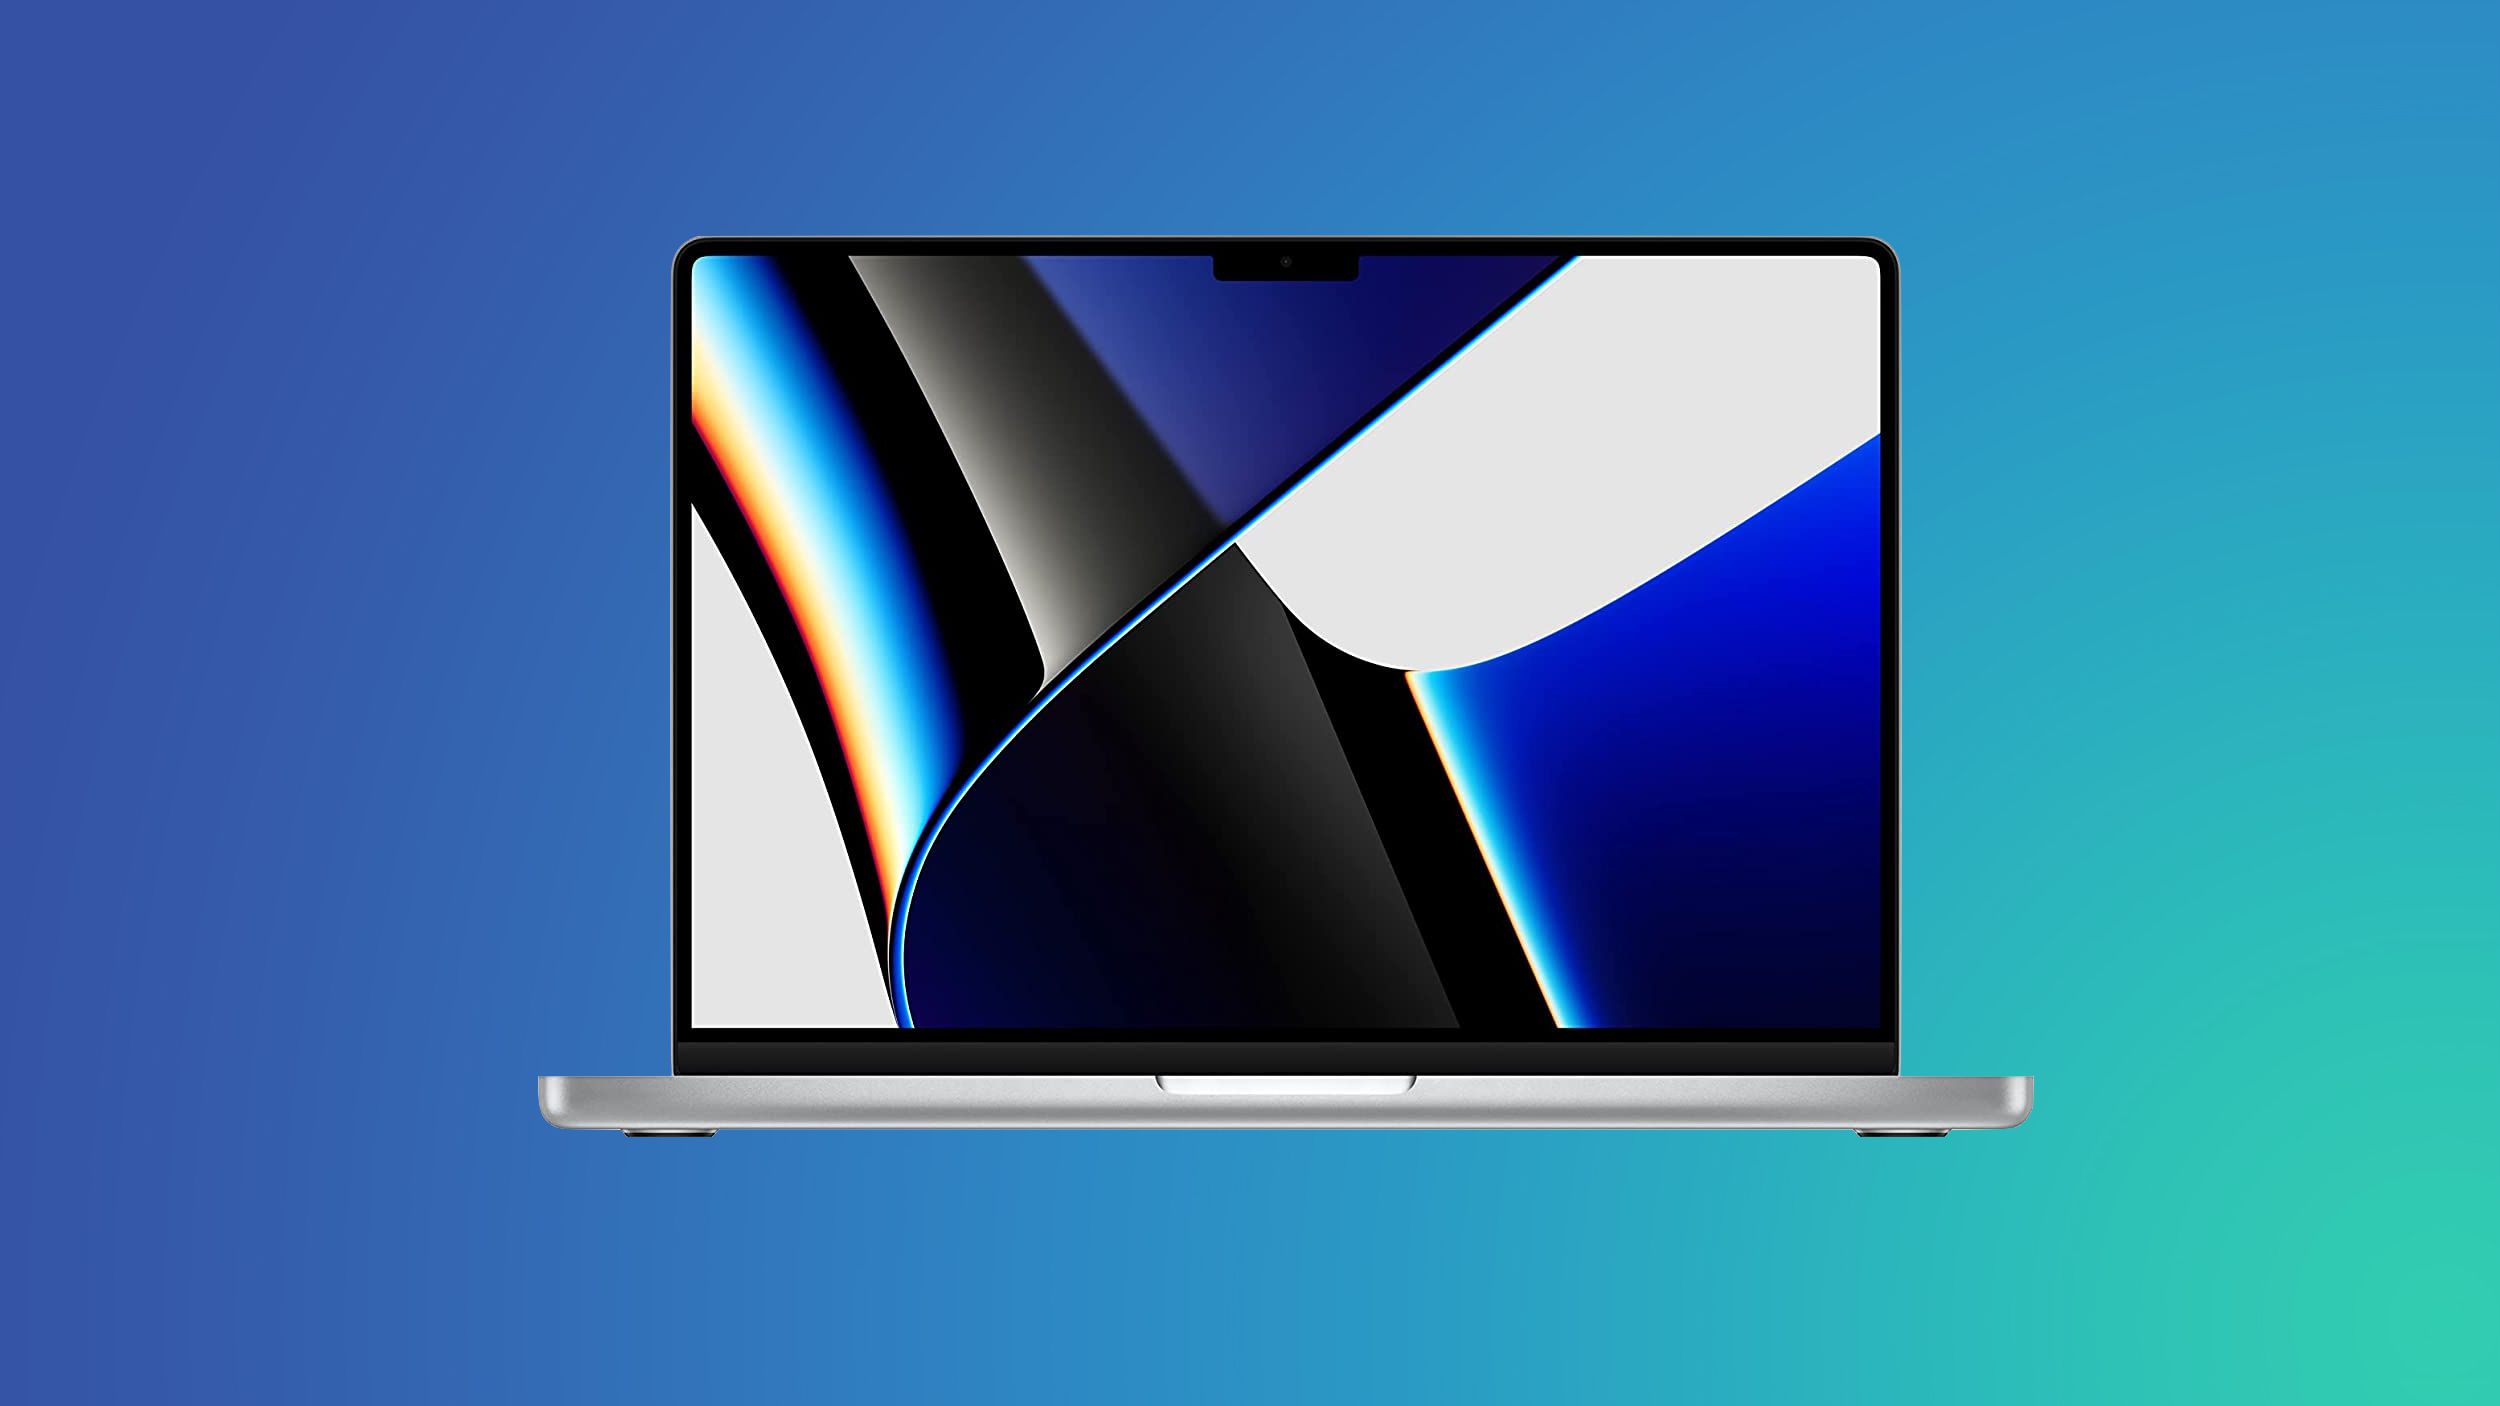 Deals: Amazon Introduces Massive Discounts on 2021 MacBook Pros, Save Up to $499